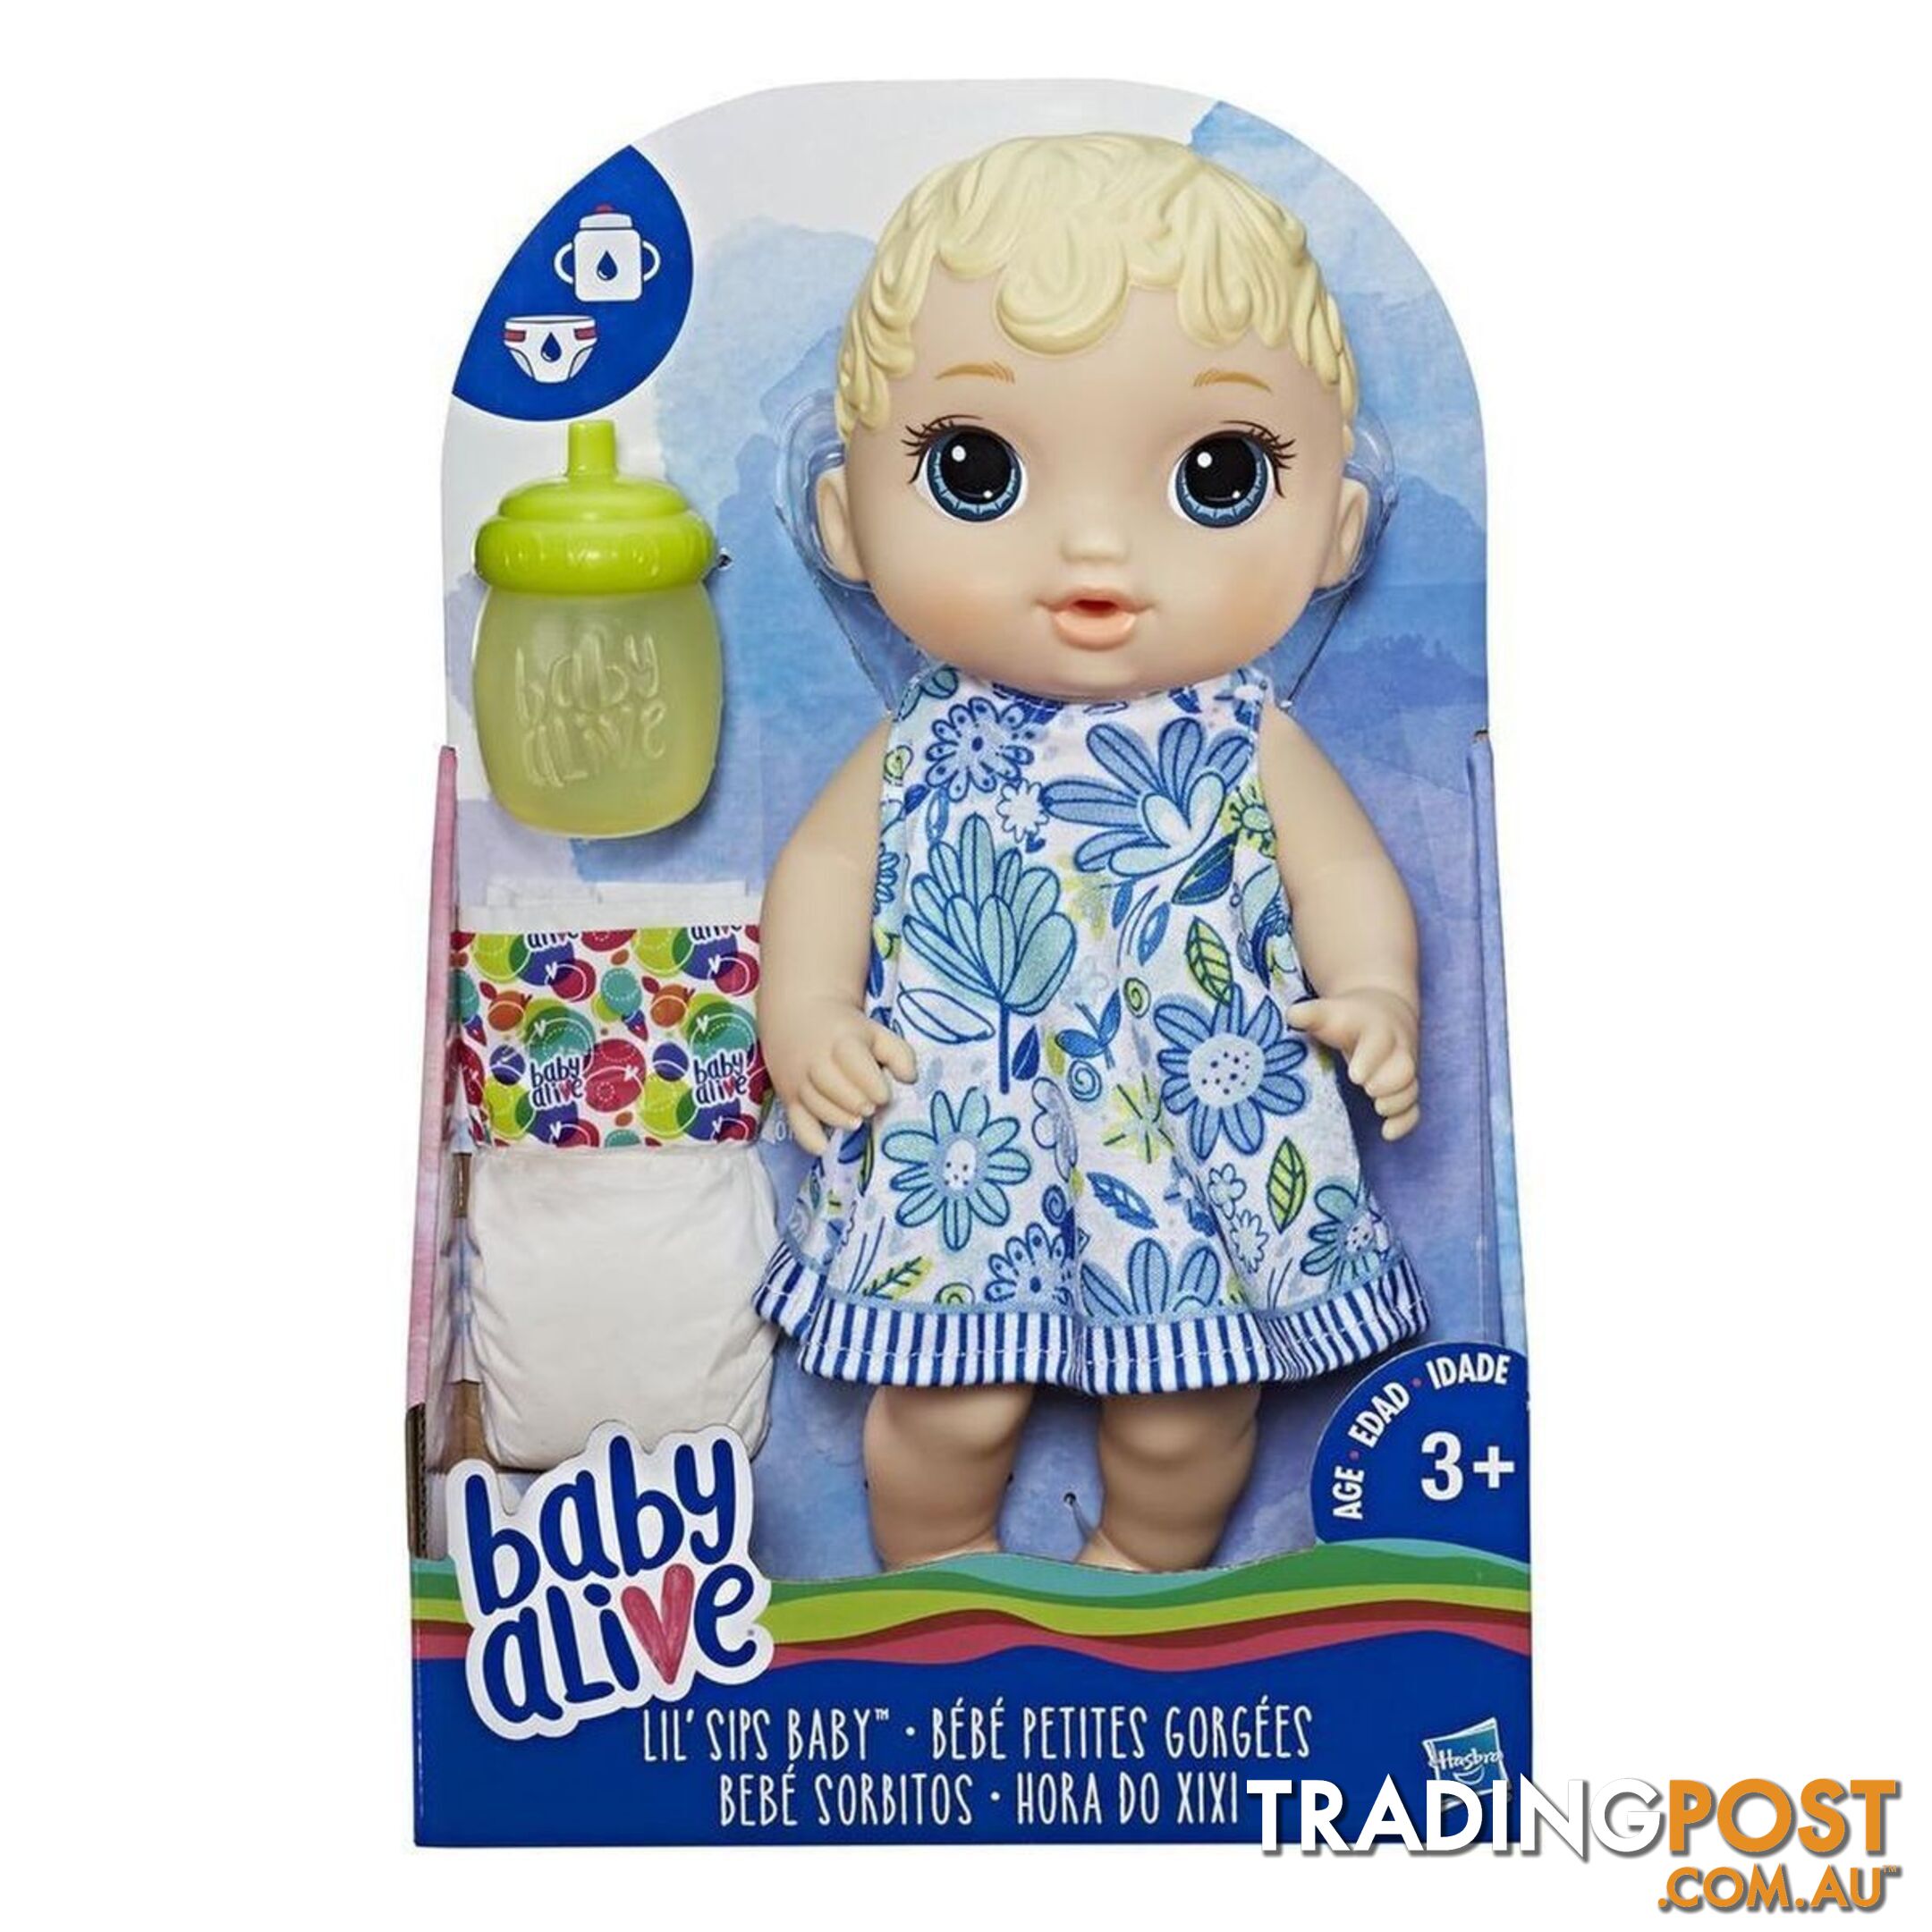 Baby Alive - Lil Sips Baby Blonde Doll Hbe0385ax00 - 630509626694